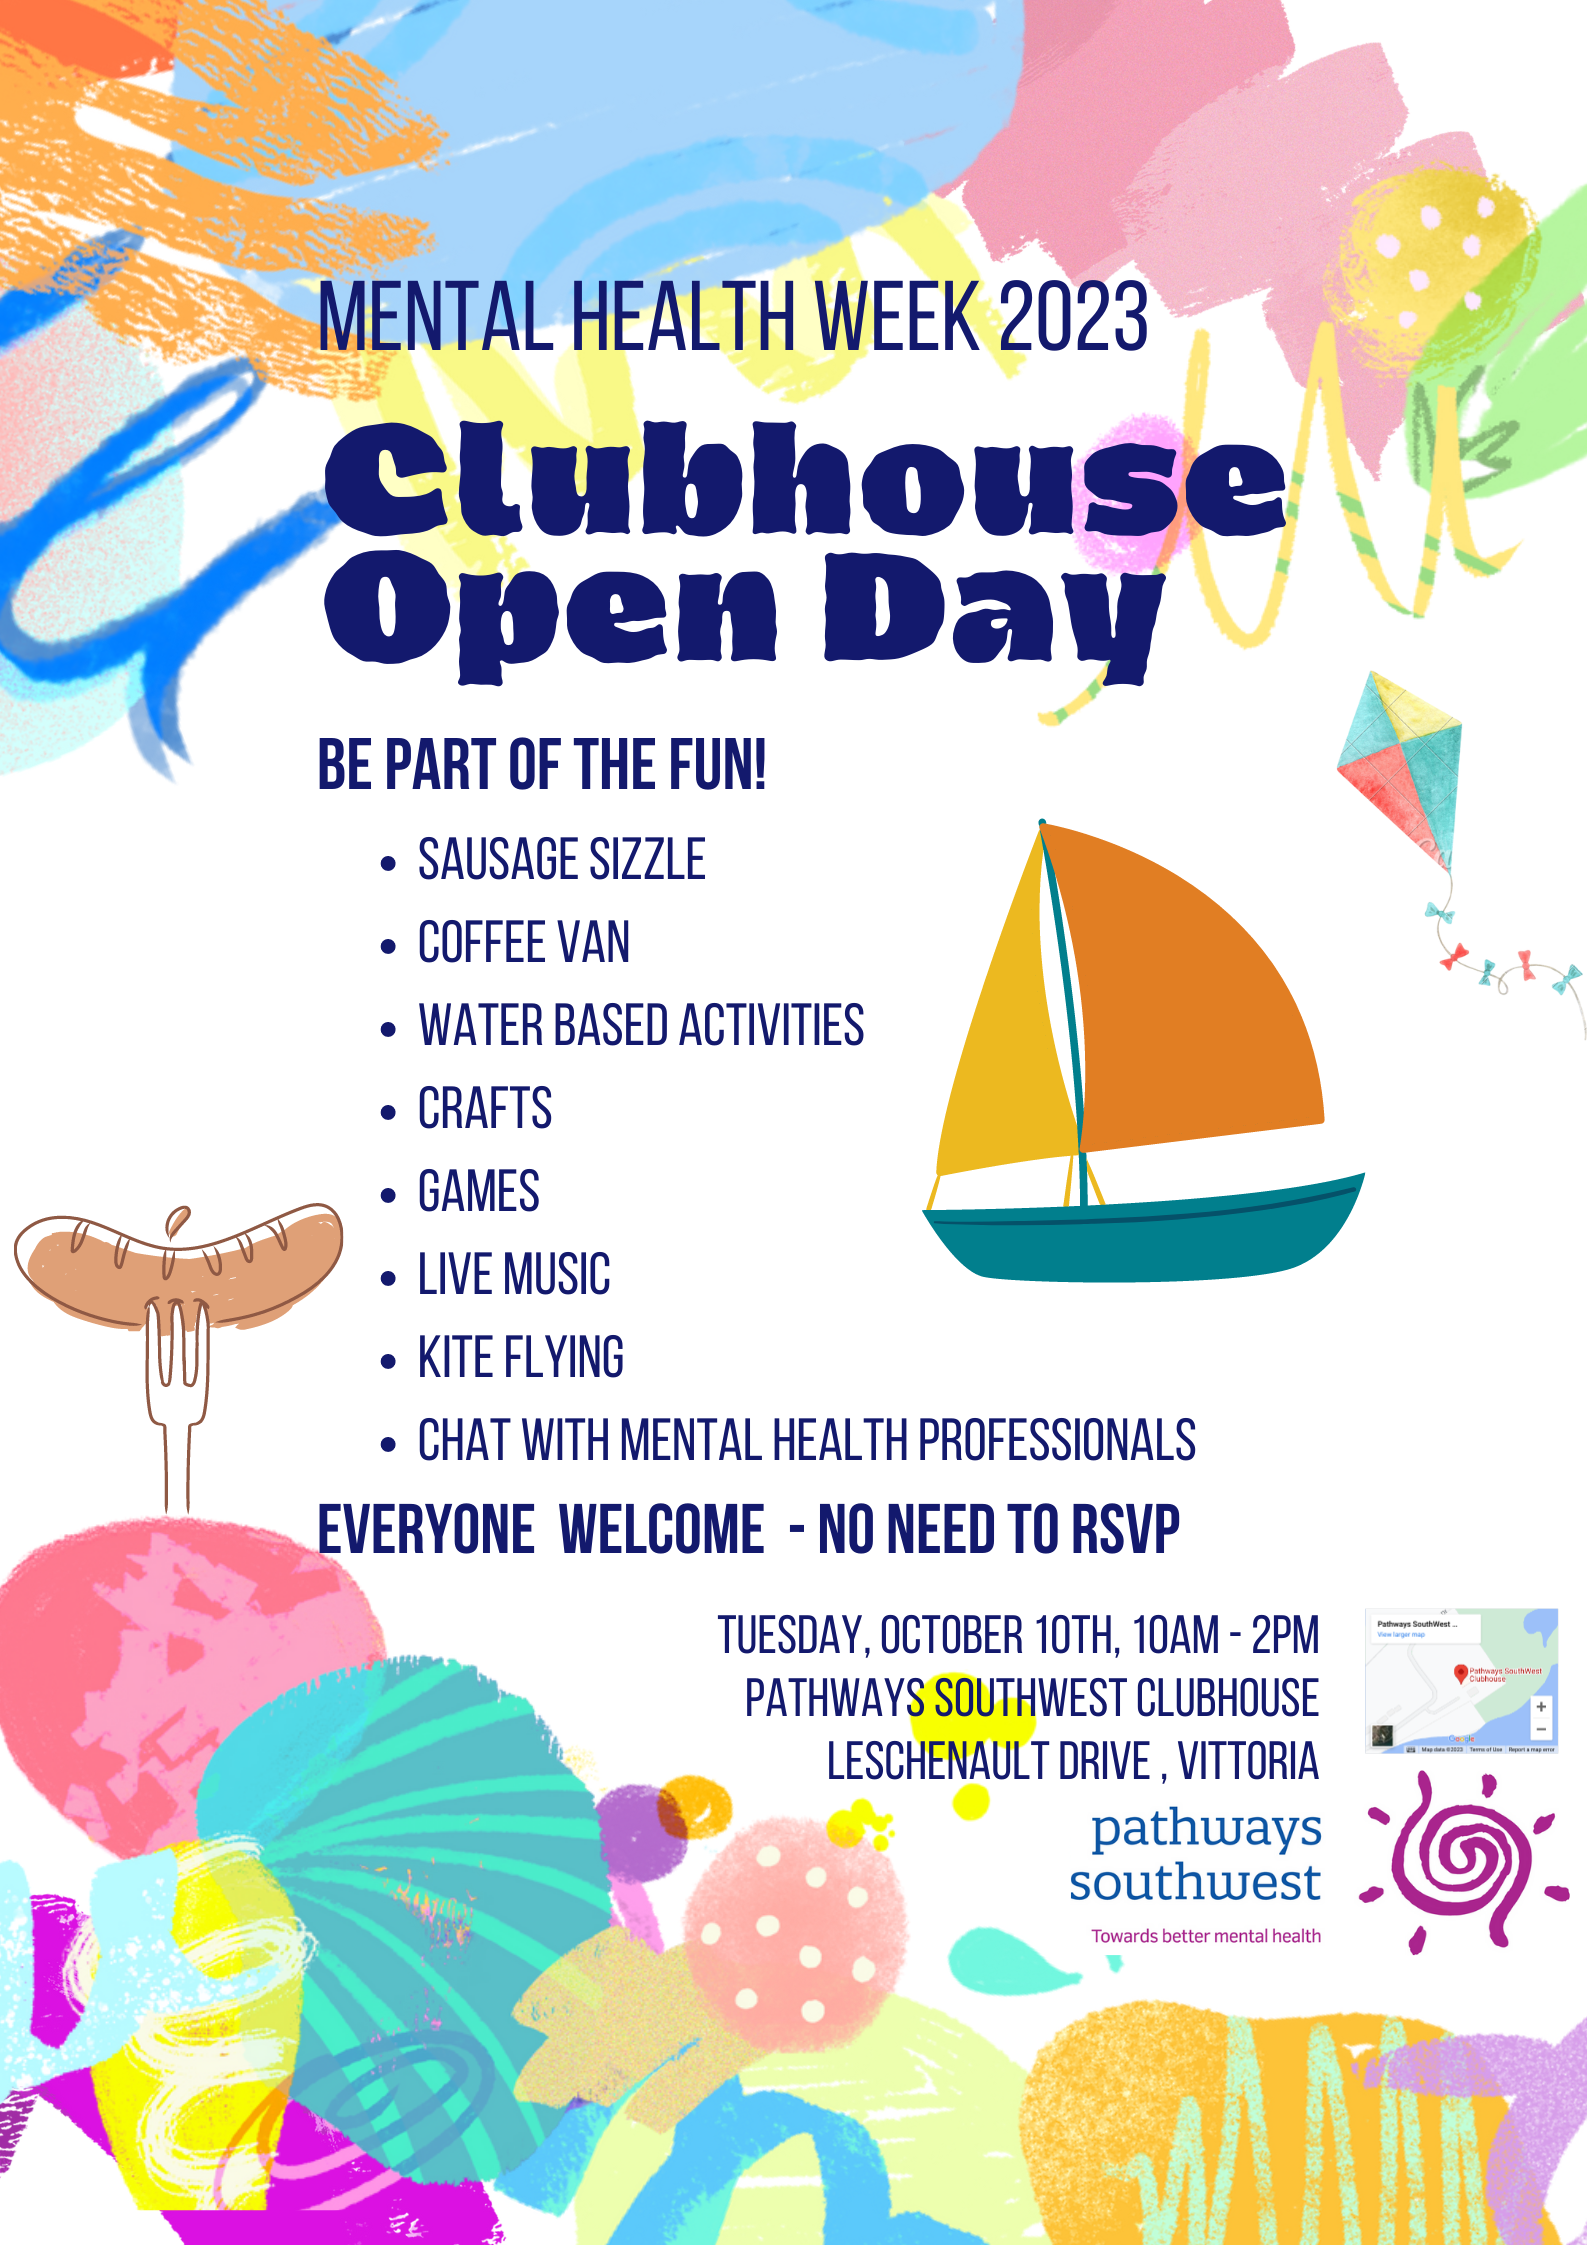 Pathways SouthWest Clubhouse Open Day